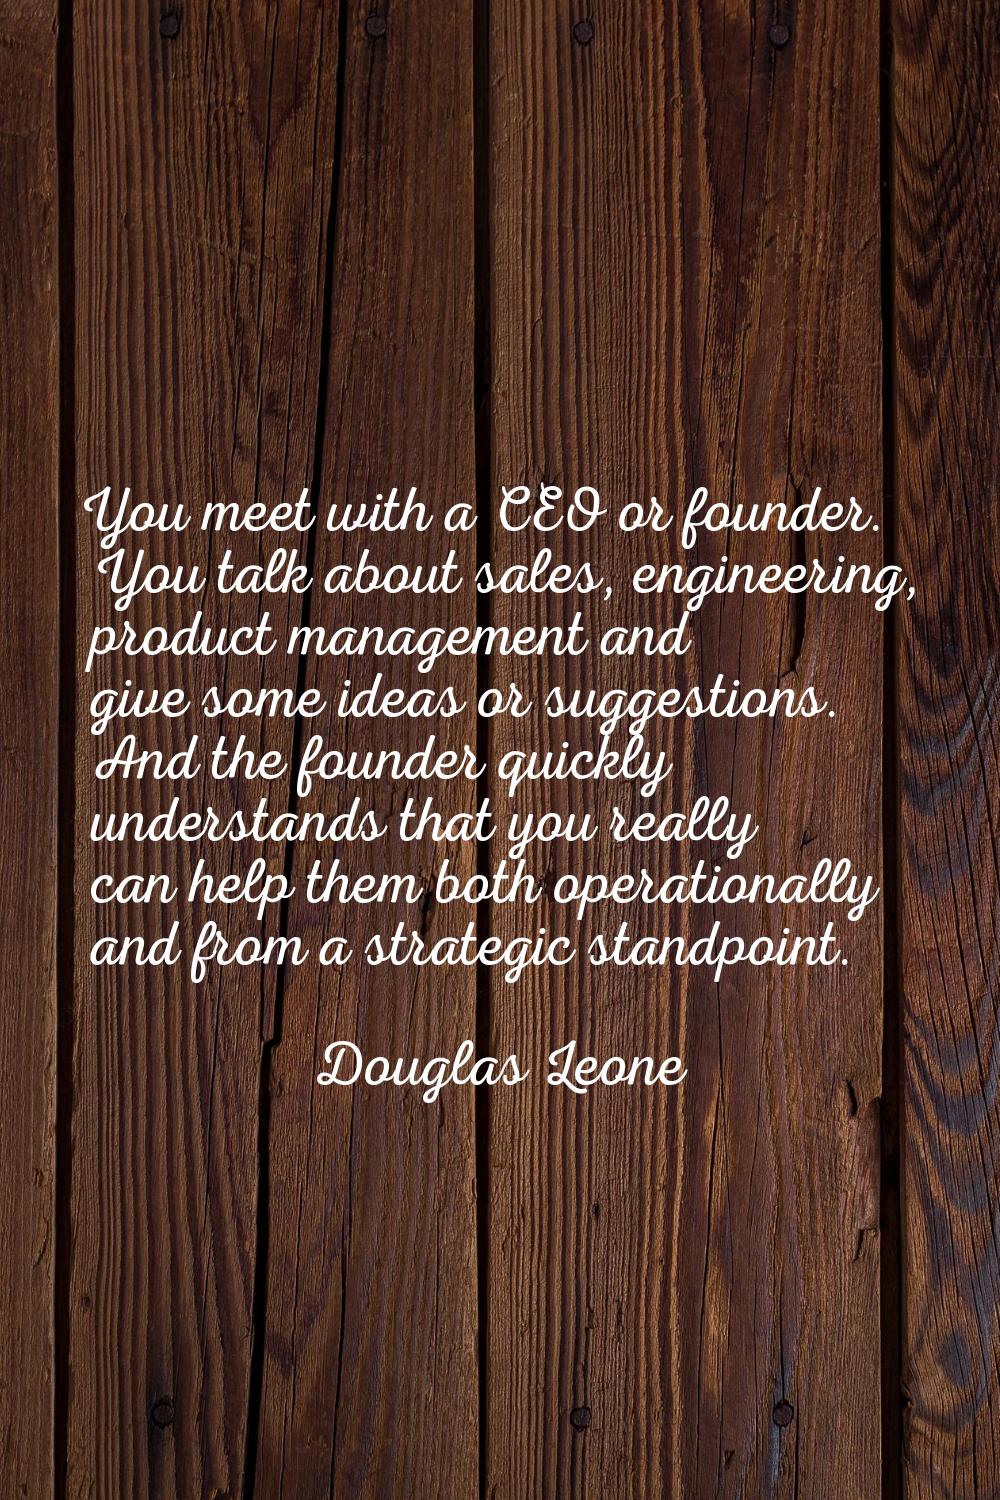 You meet with a CEO or founder. You talk about sales, engineering, product management and give some